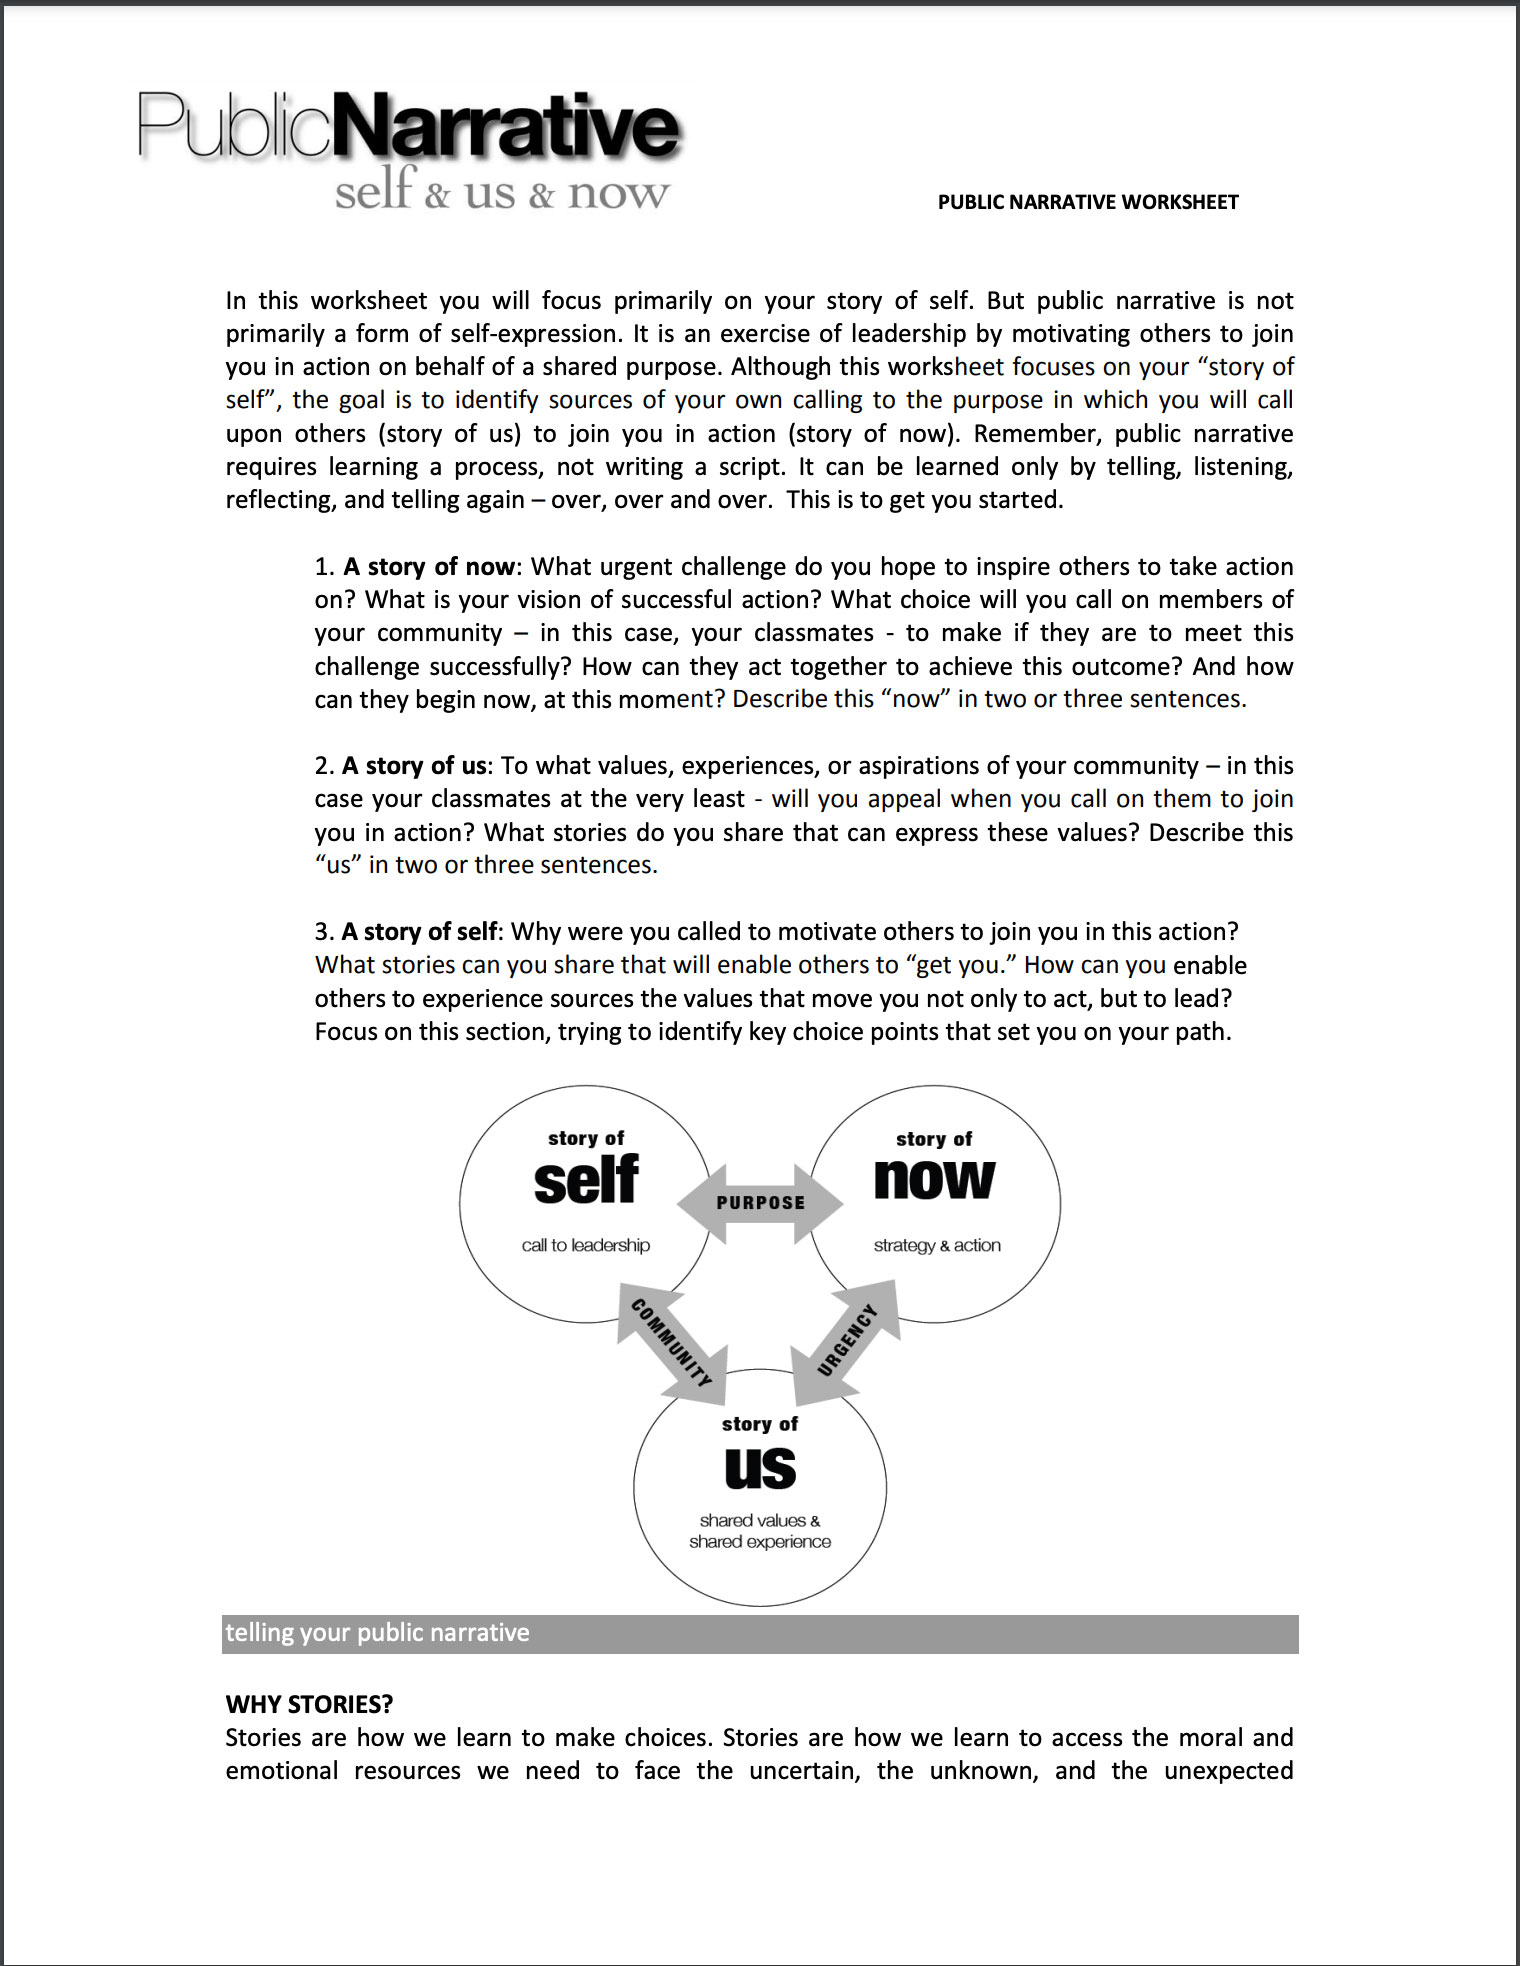 First page of The Public Narrative Worksheet